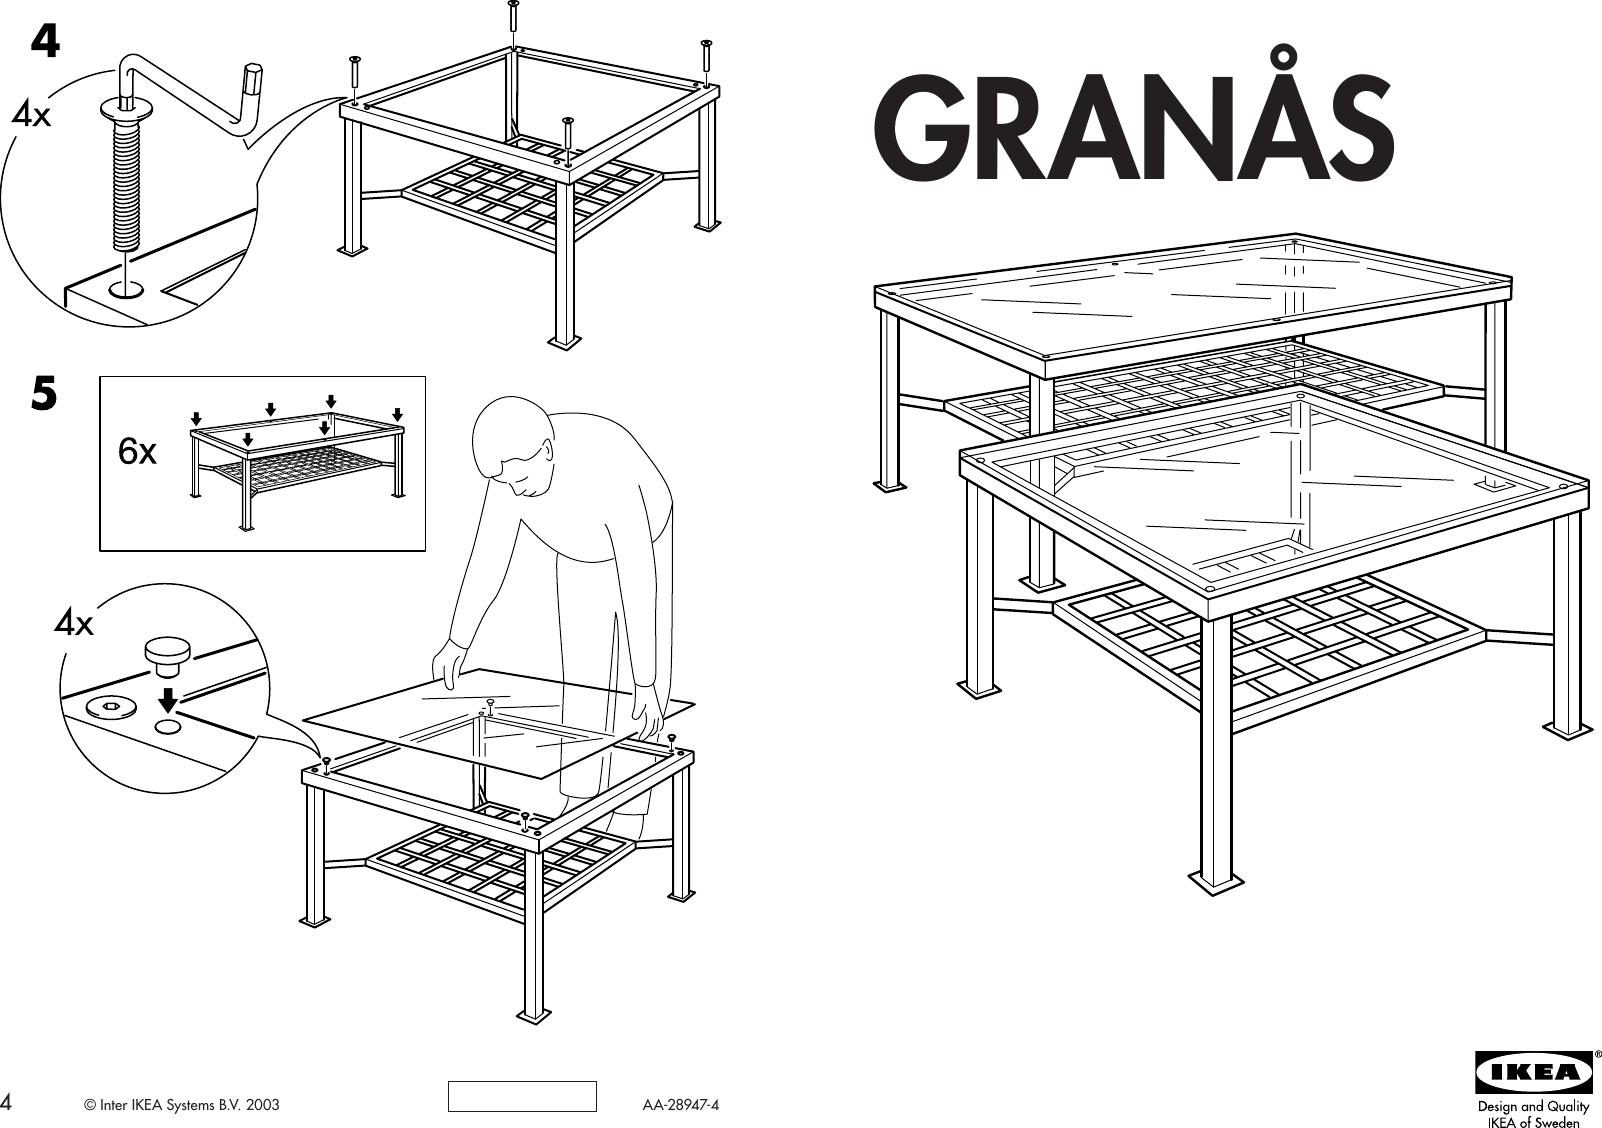 Page 1 of 2 - Ikea Ikea-Granas-Coffee-Table-47X31-Assembly-Instruction